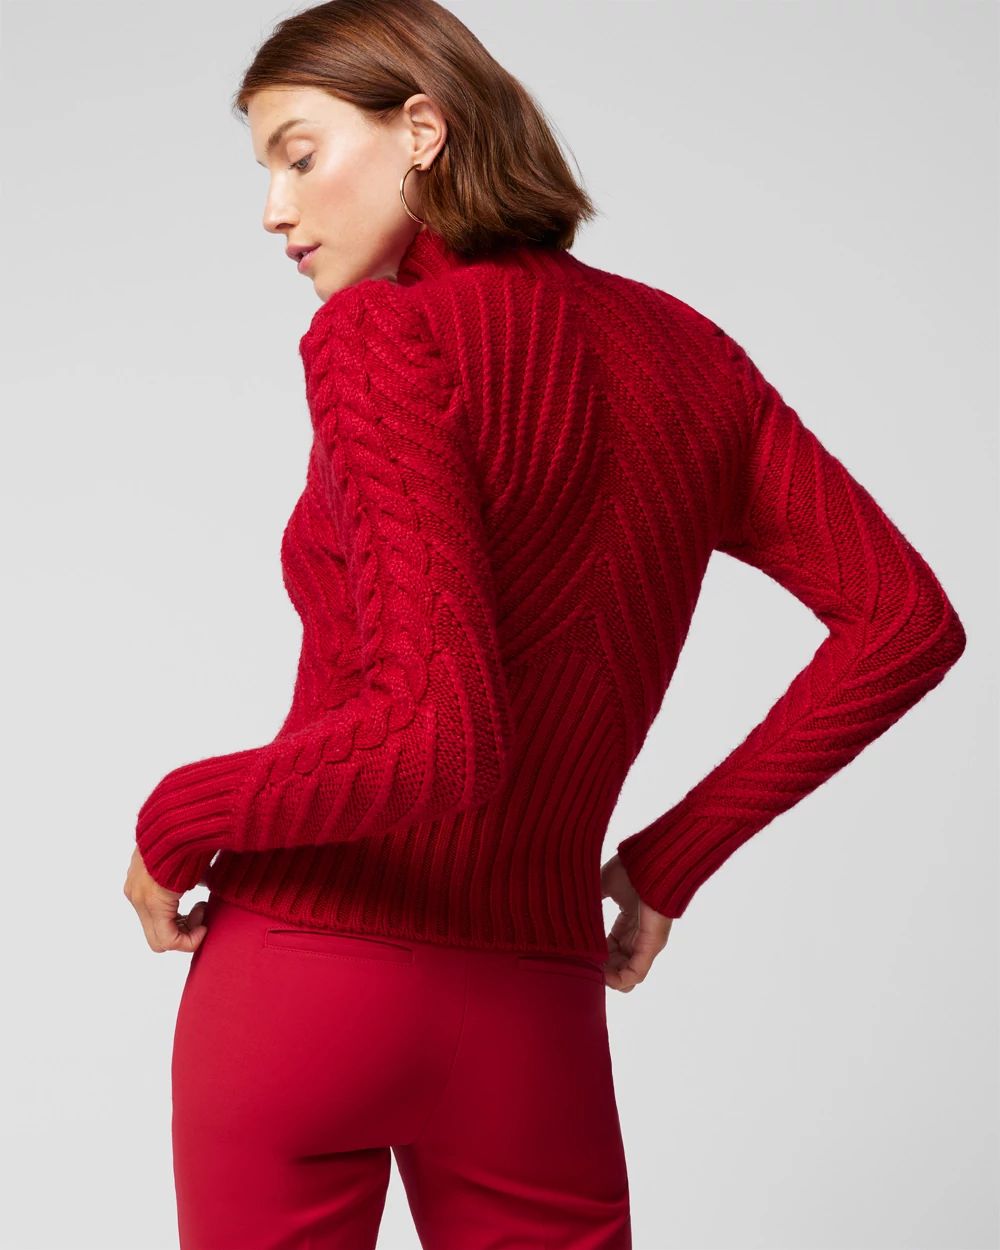 Puff Sleeve Cable Mockneck Sweater click to view larger image.